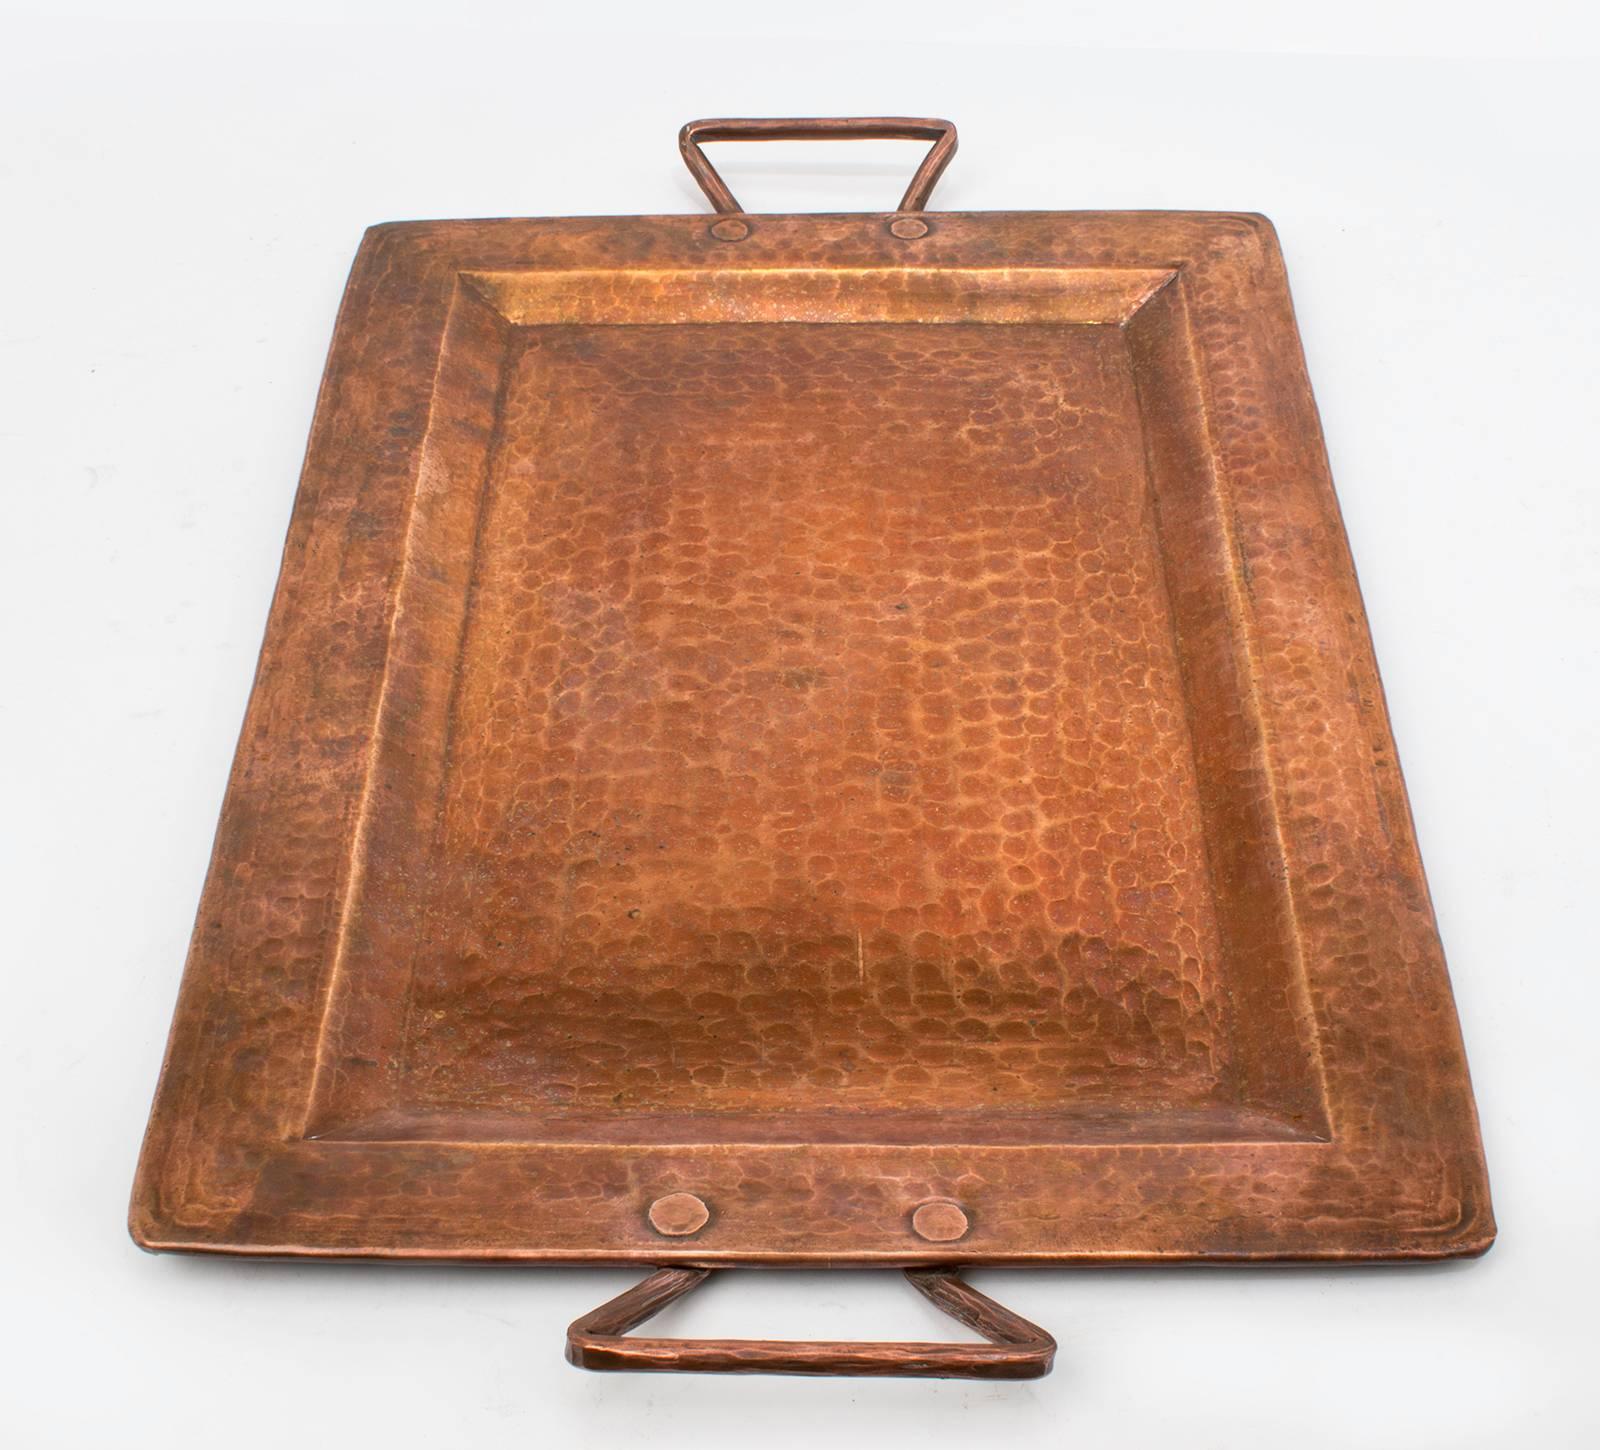 1950s, beautifully handmade, hammered copper tray. Rectangular with applied handles. Nicely aged with use. Great for bar serving with many use. Perfect for your decor.
In excellent condition.